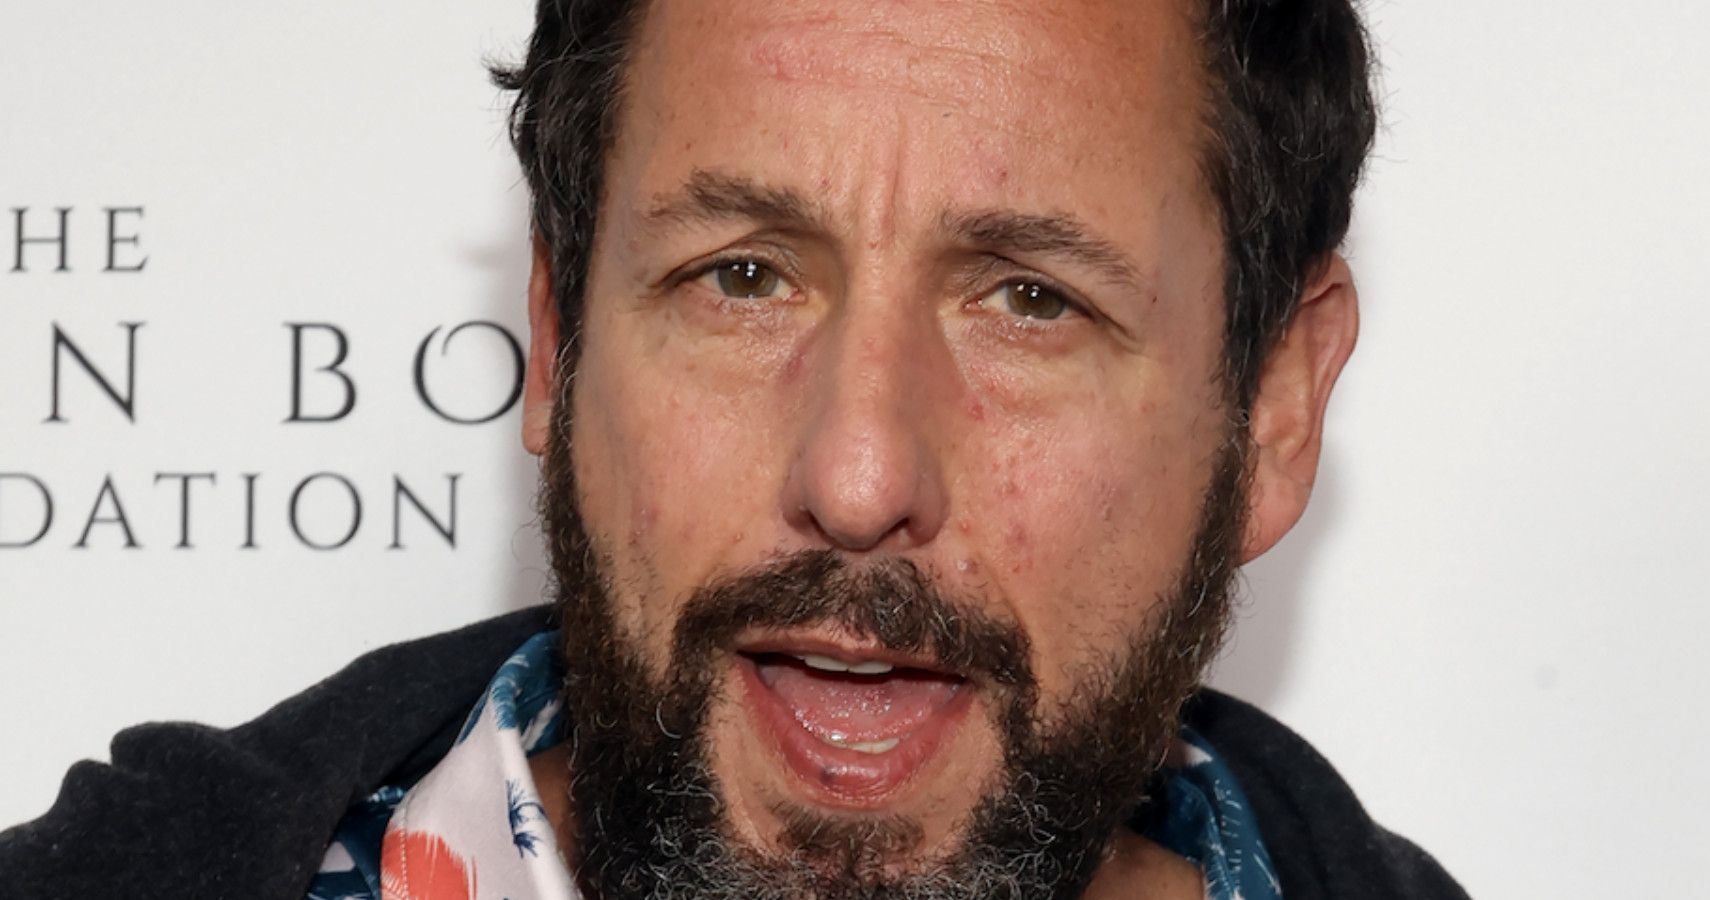 Adam Sandler S Teen Daughters Caught In Nepotism Controversy After Starring In His New Film 